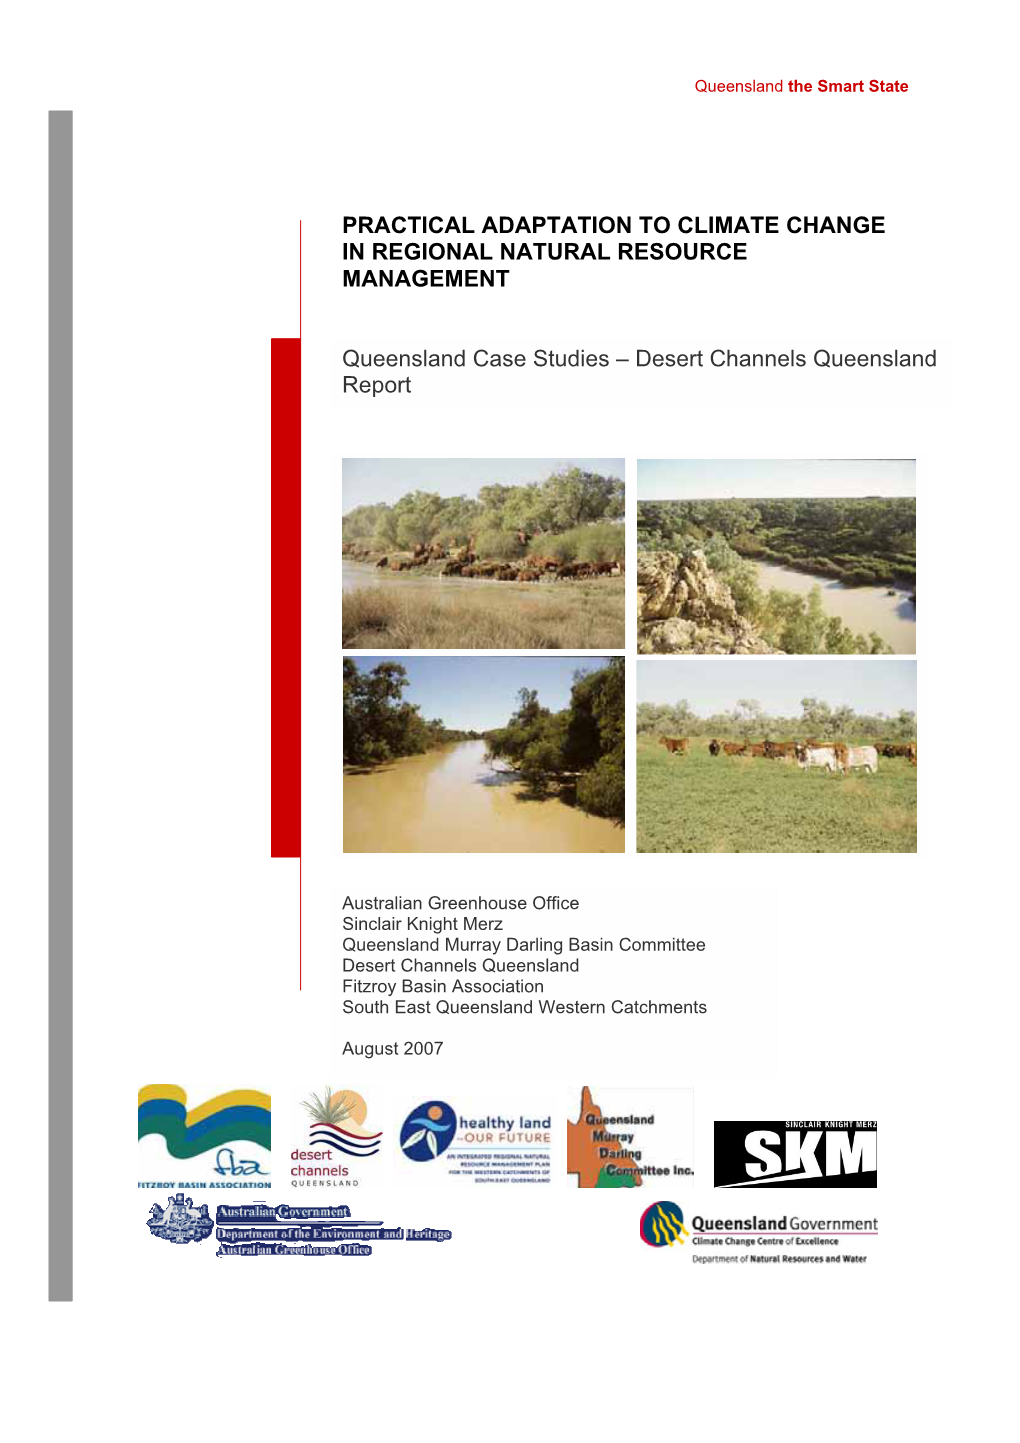 Climate Change Impacts on the Water Resources of the Cooper Creek Catchment